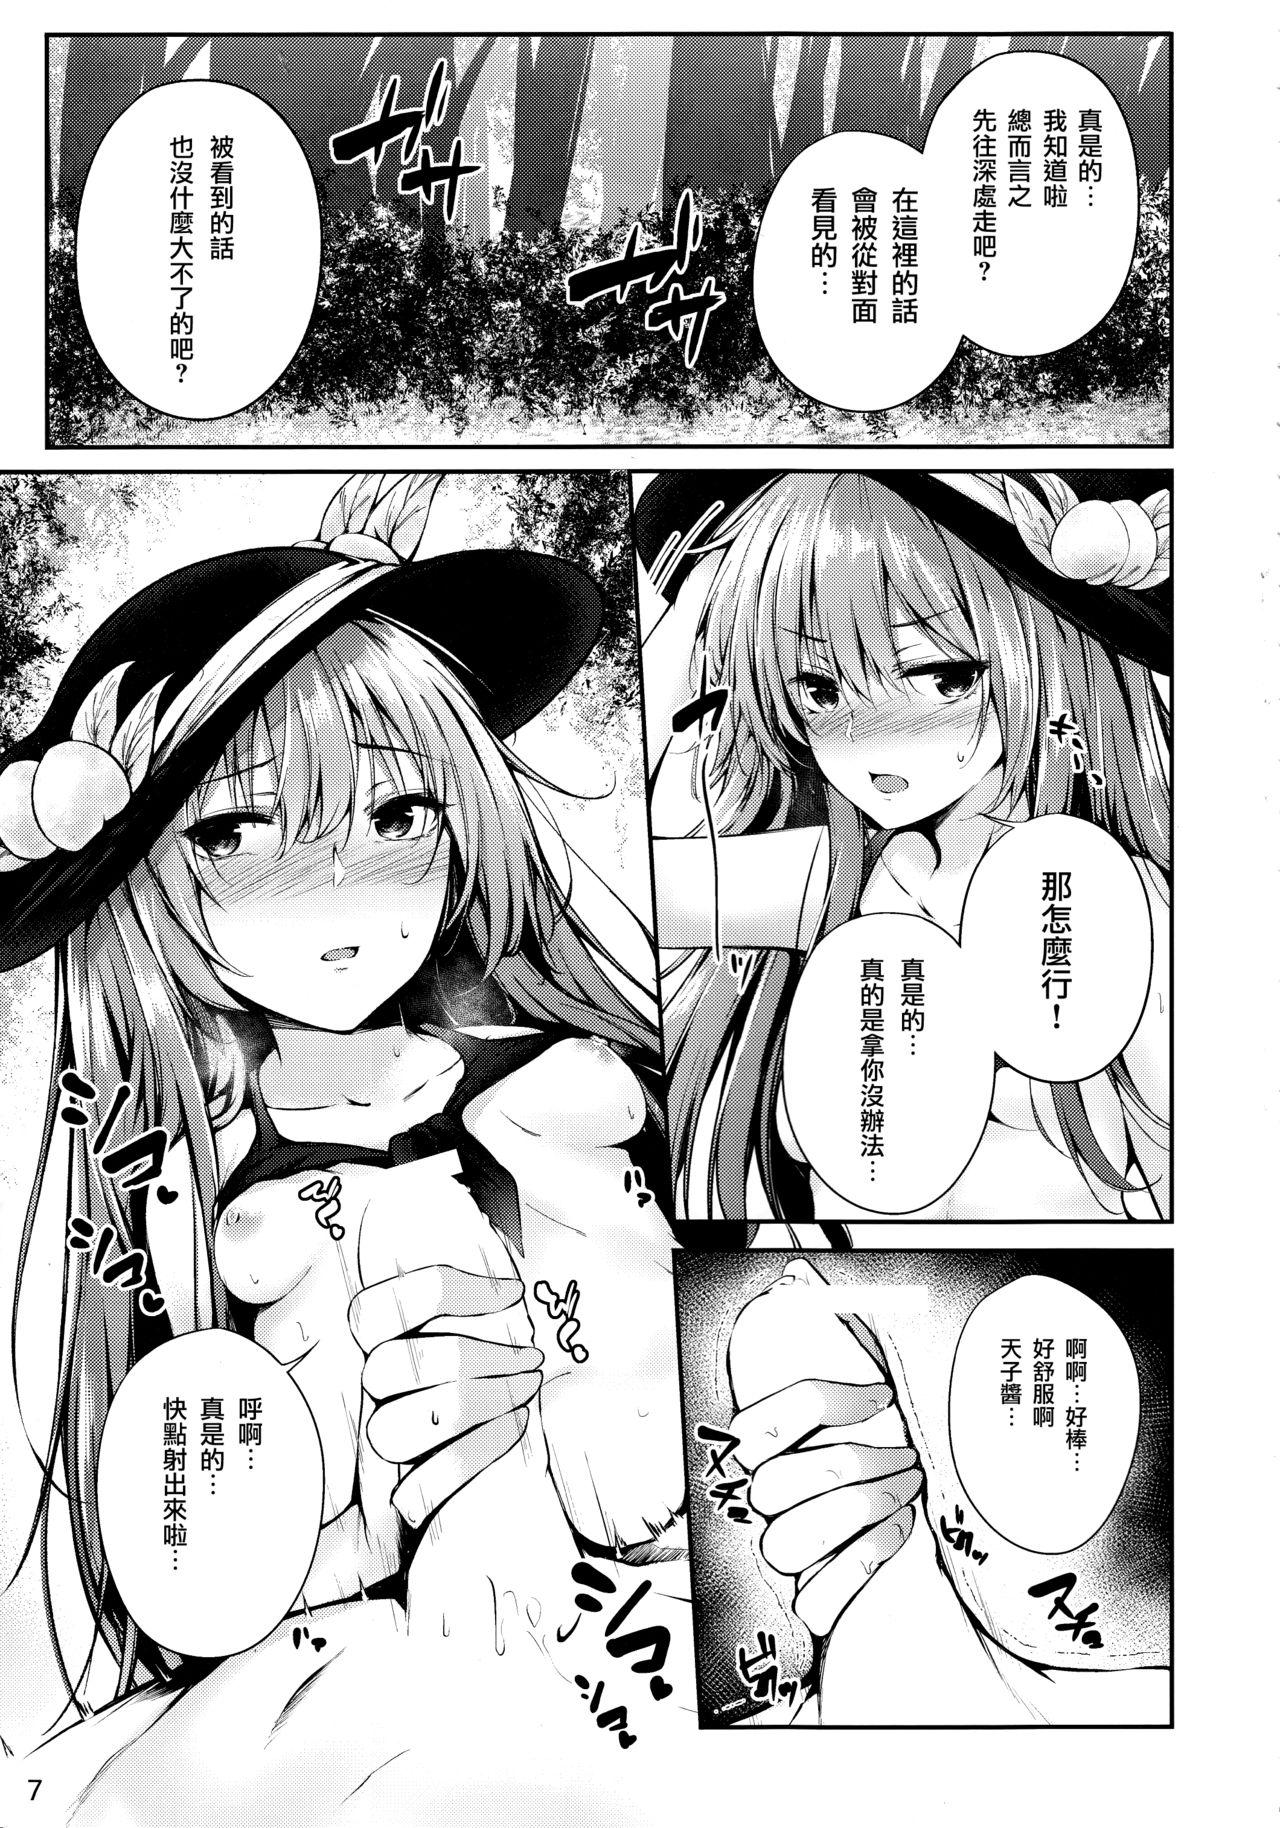 Old Young Tenshi Onee-chan 2 Makasenasai! - Touhou project Perverted - Page 7